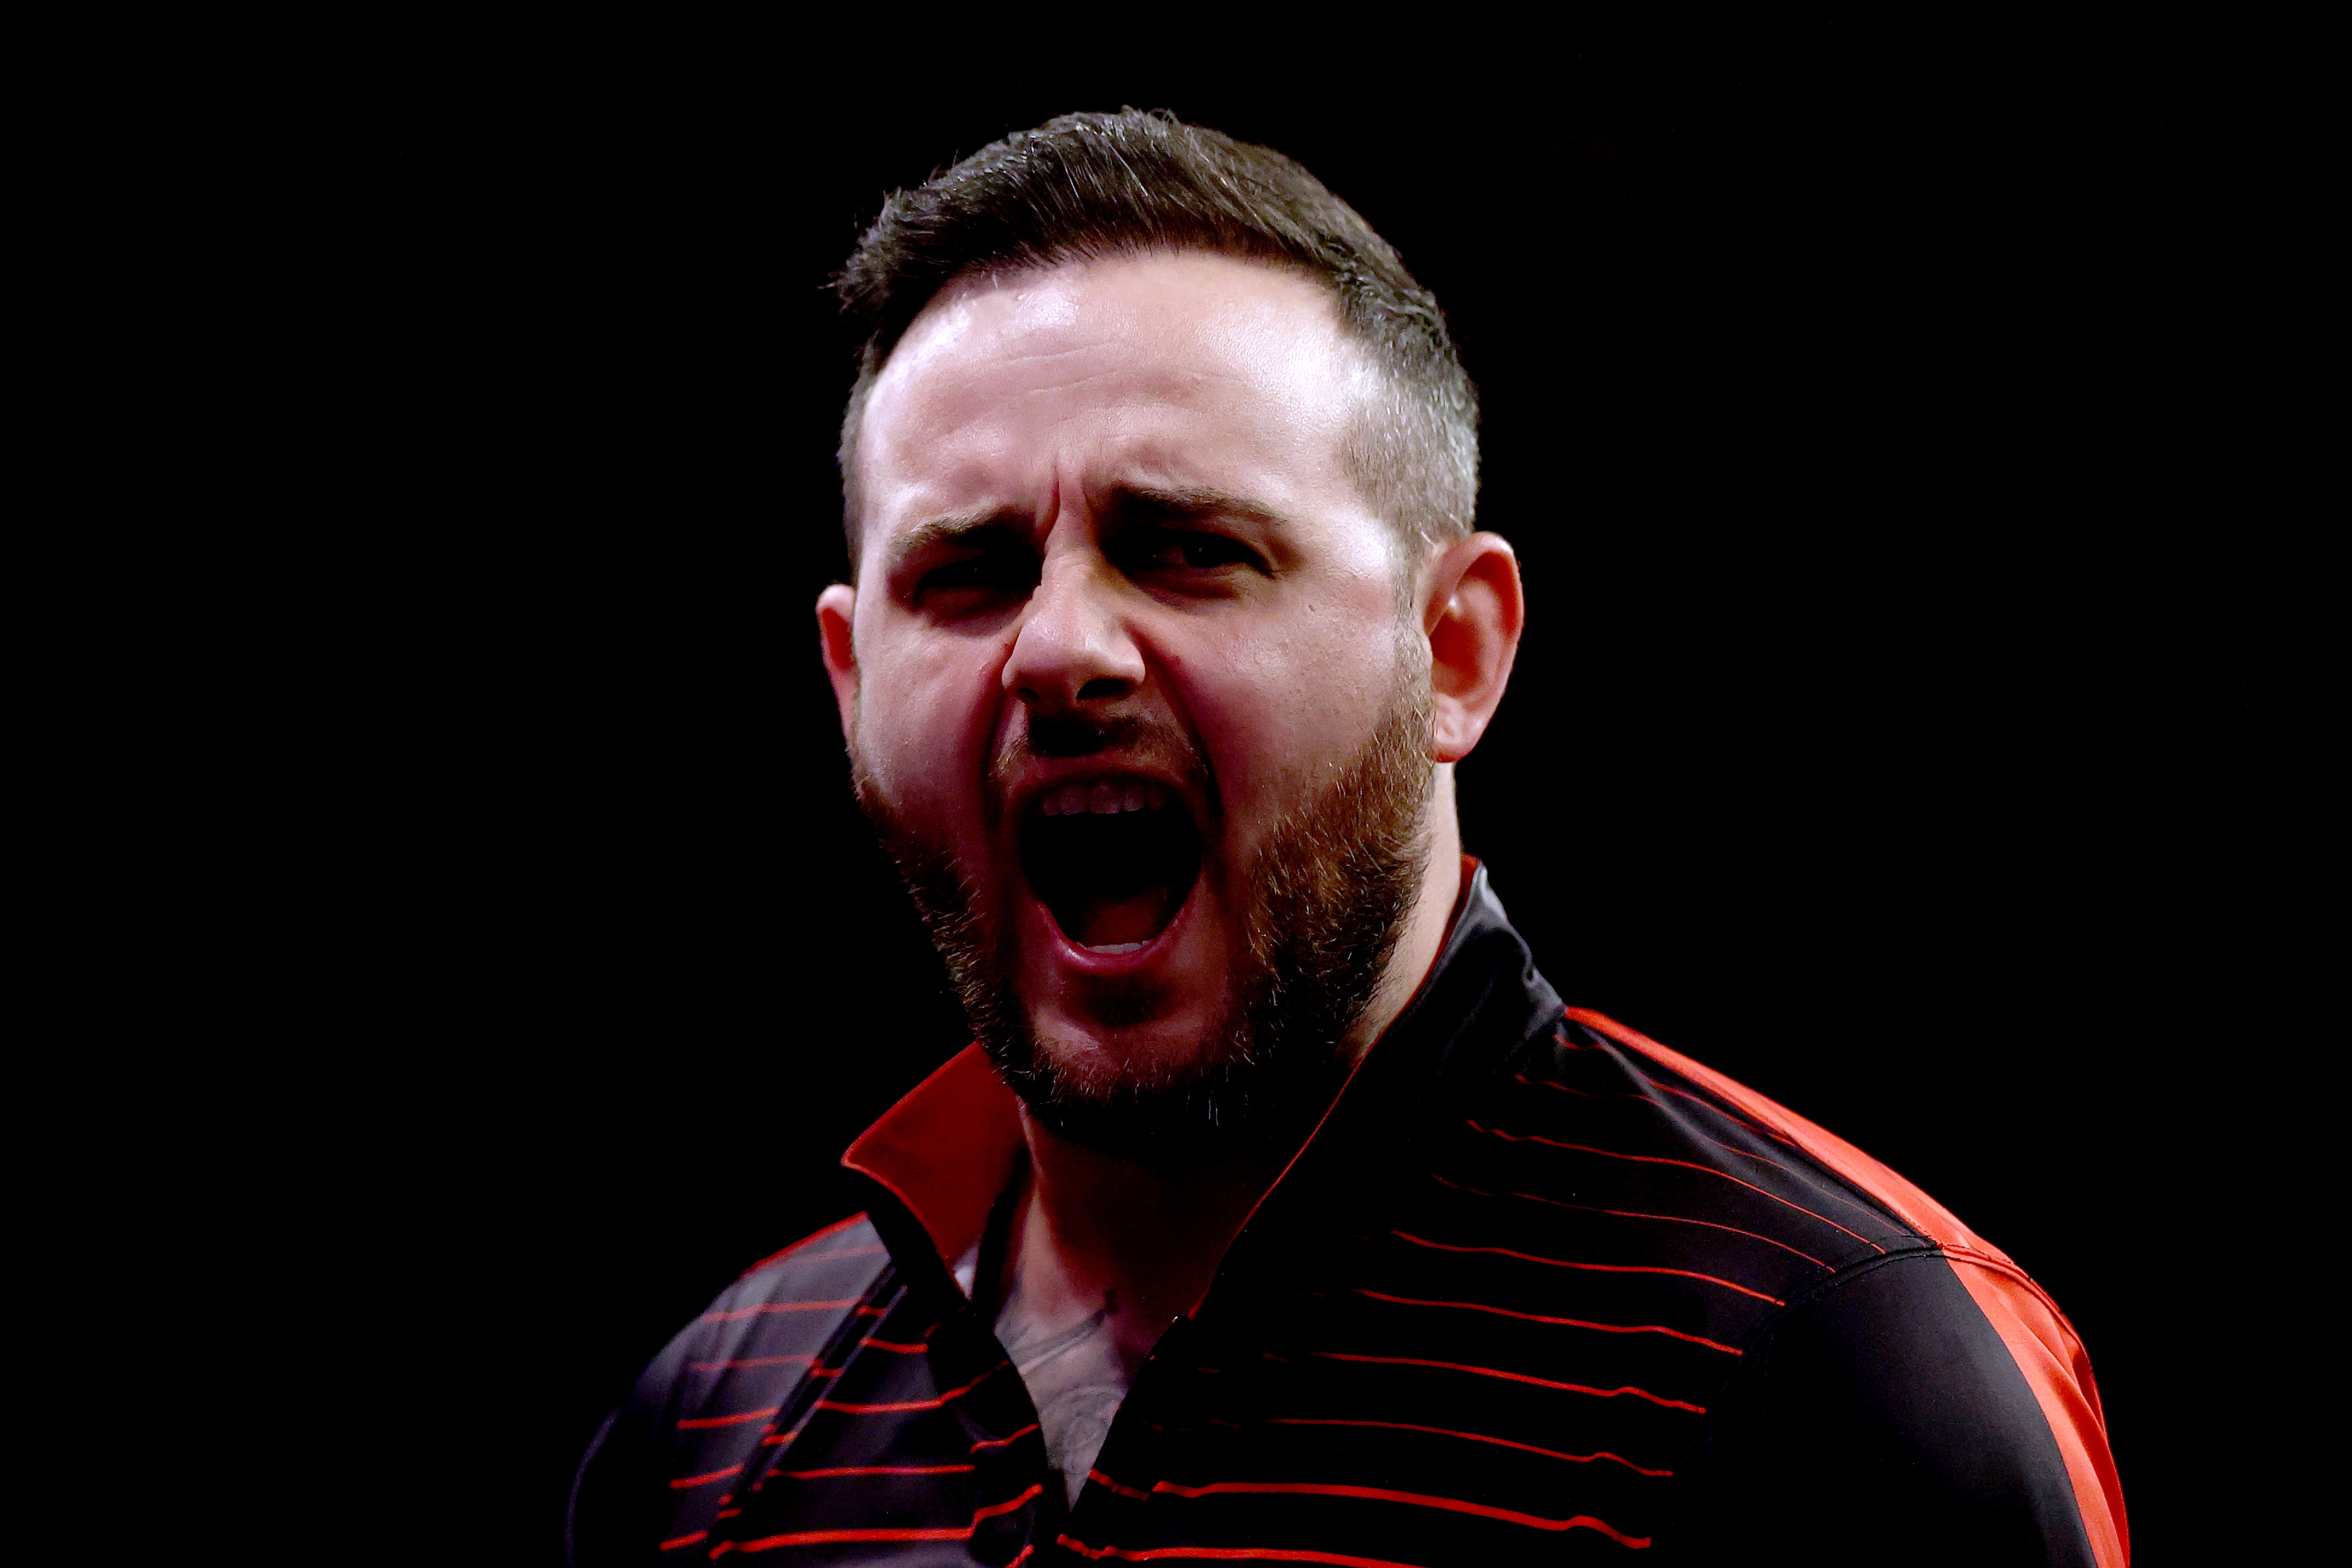 Joe Cullen during his match with Gary Anderson